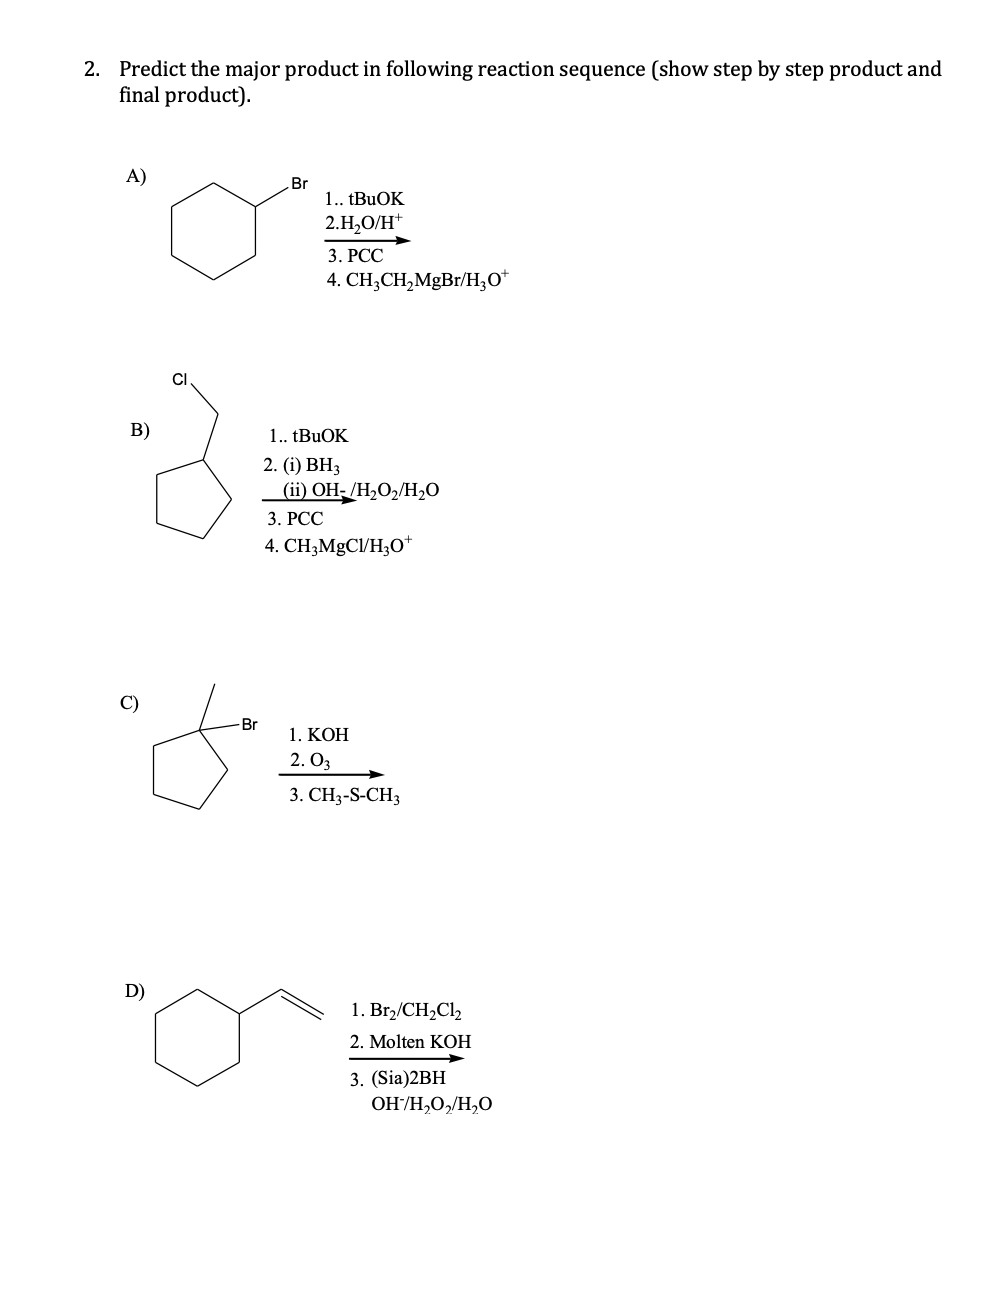 2. Predict the major product in following reaction sequence (show step by step product and
final product).
A)
Br
1. TBUOK
2.H,O/H*
3. РСС
4. CH,CH,MgBr/H;0*
CI
B)
1. tBuOK
2. (i) ВН,
(ii) OH- /H,O2/H2O
3. РСС
4. CH;MgCl/H3O*
C)
-Br
1. КОН
2. O3
3. CH3-S-CH3
D)
1. Br,/CH2C12
2. Molten KOH
3. (Sia)2BH
OH/H,O,/H,O
